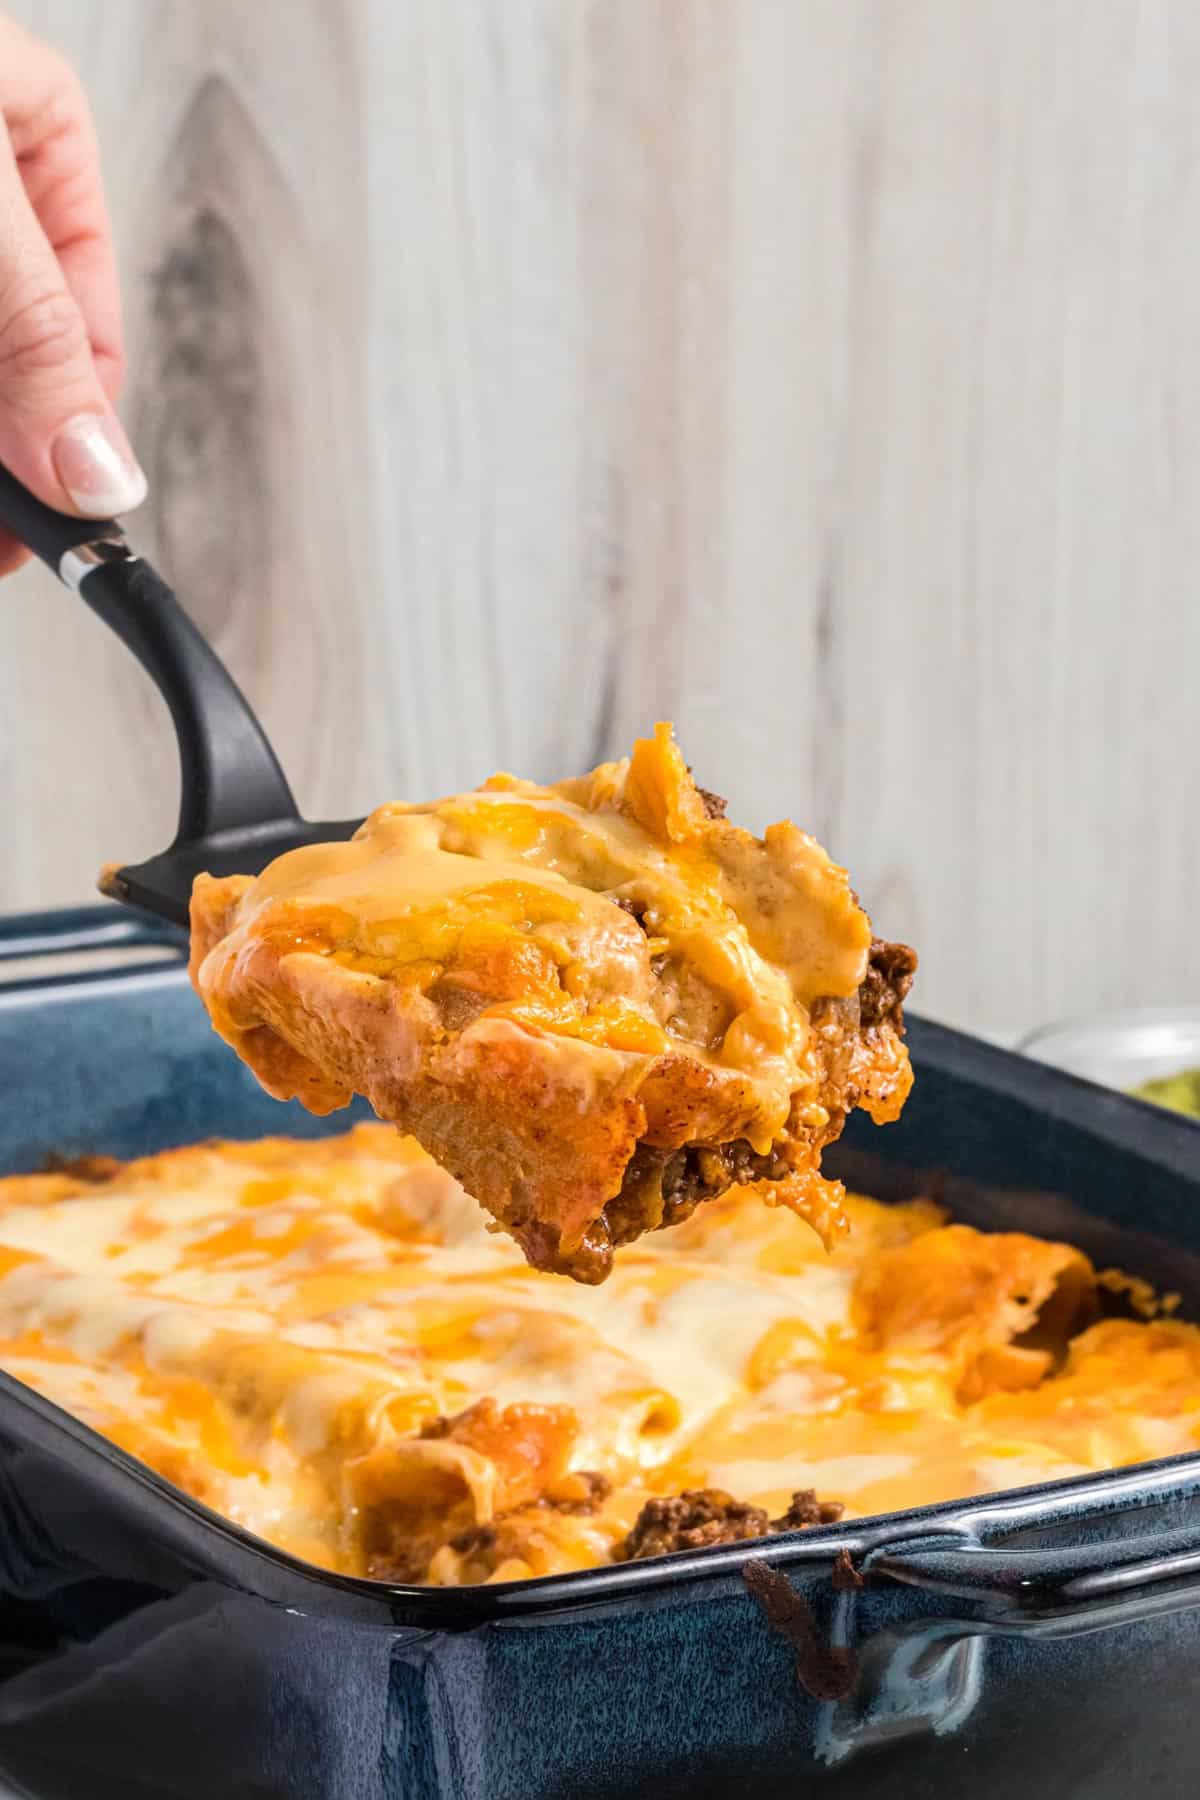 enchiladas being lifted out of a pan.